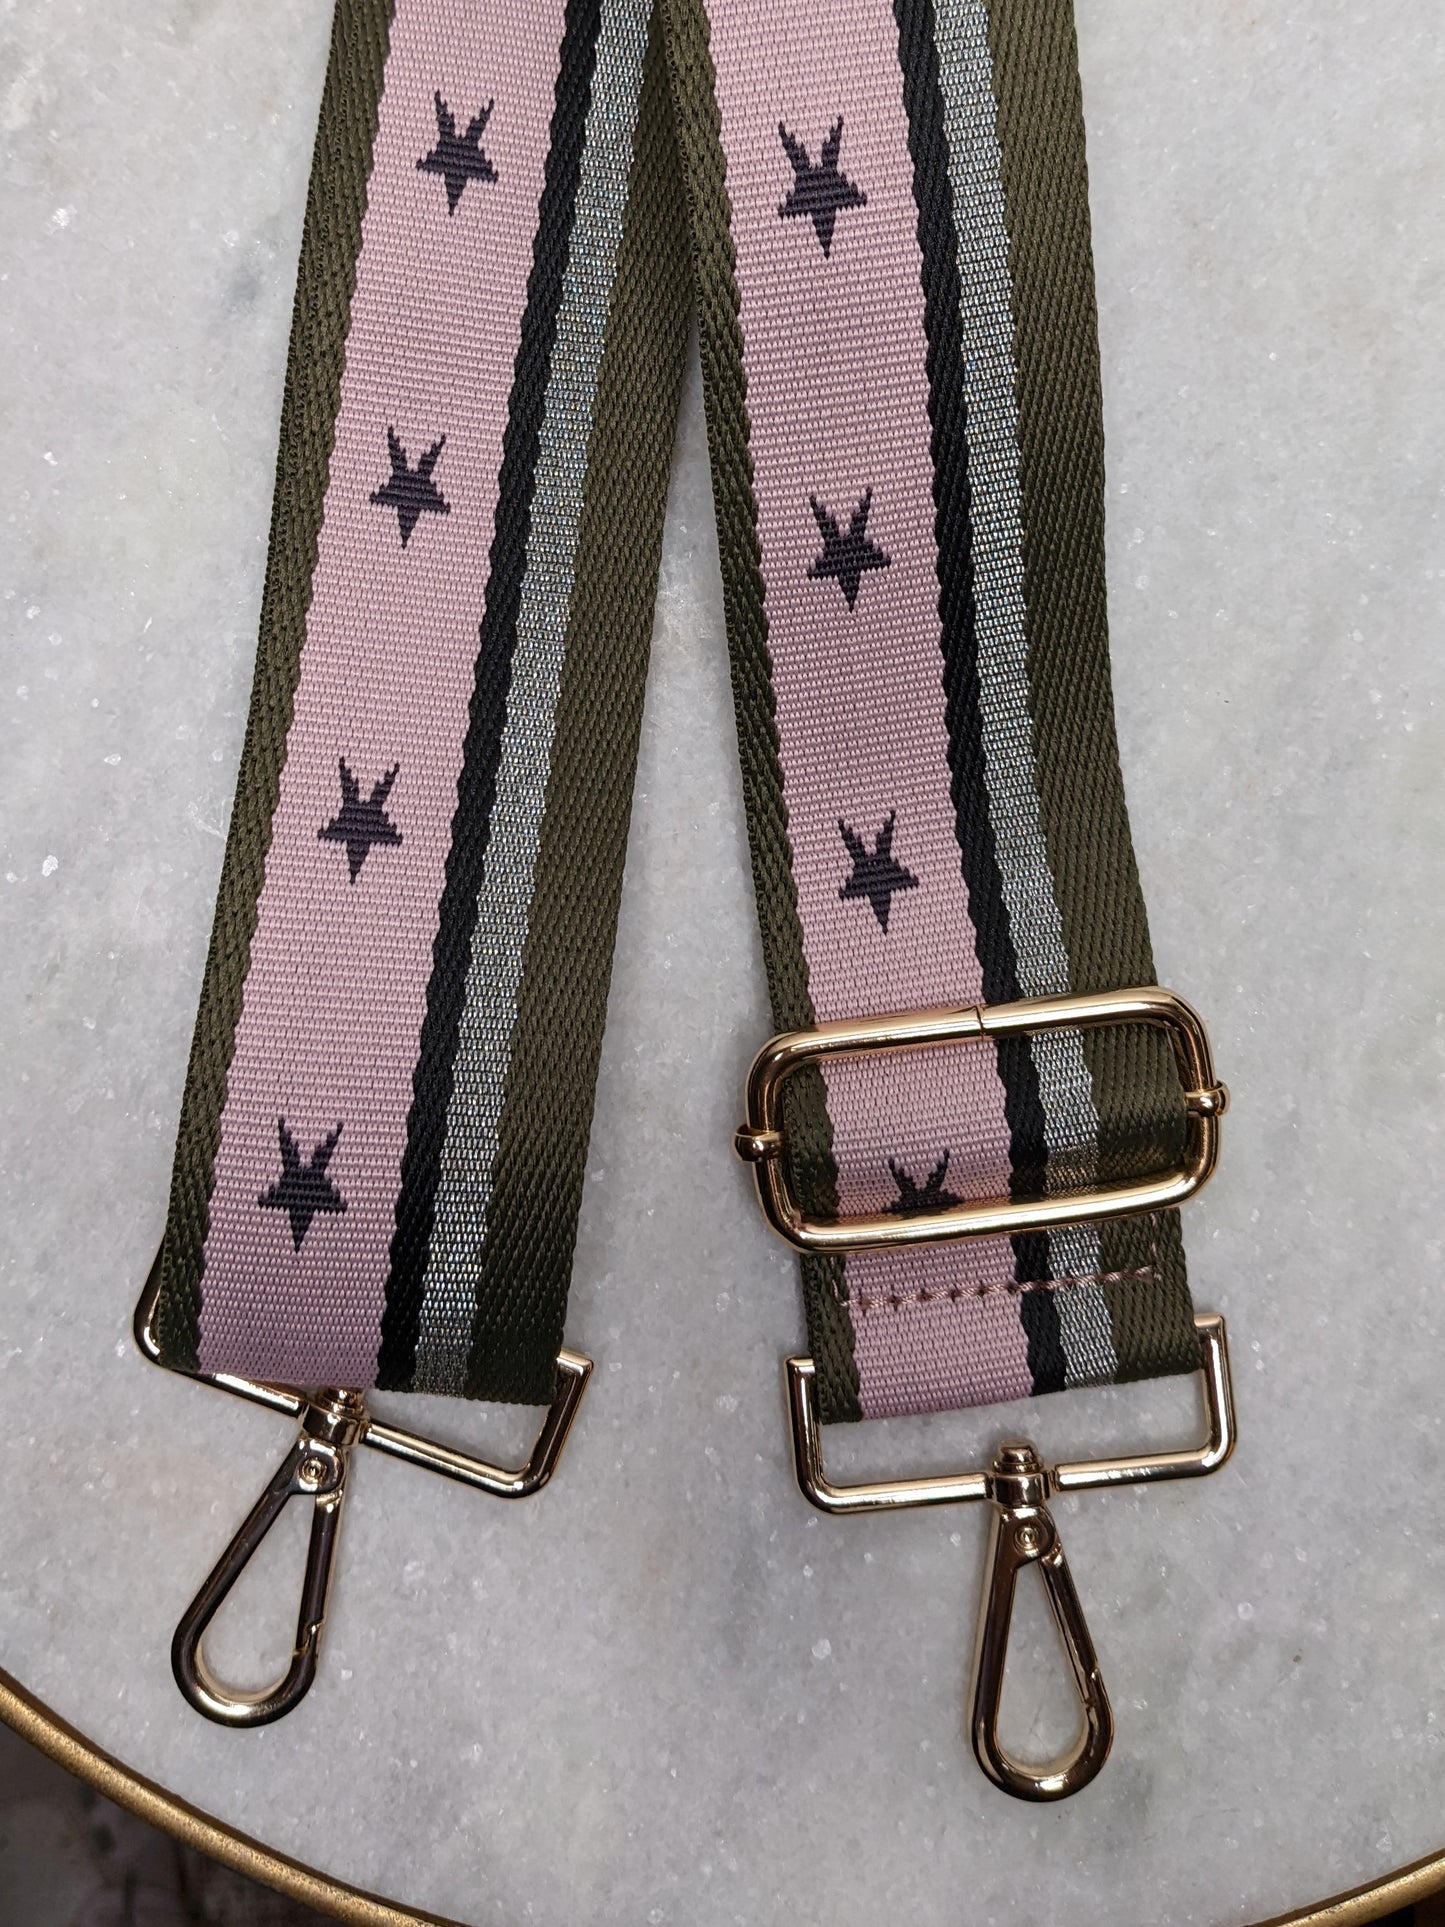 CTHRU Purses Stars and Stripes GI Jane Pink Silver Purse Strap with Gold Accents NWOT